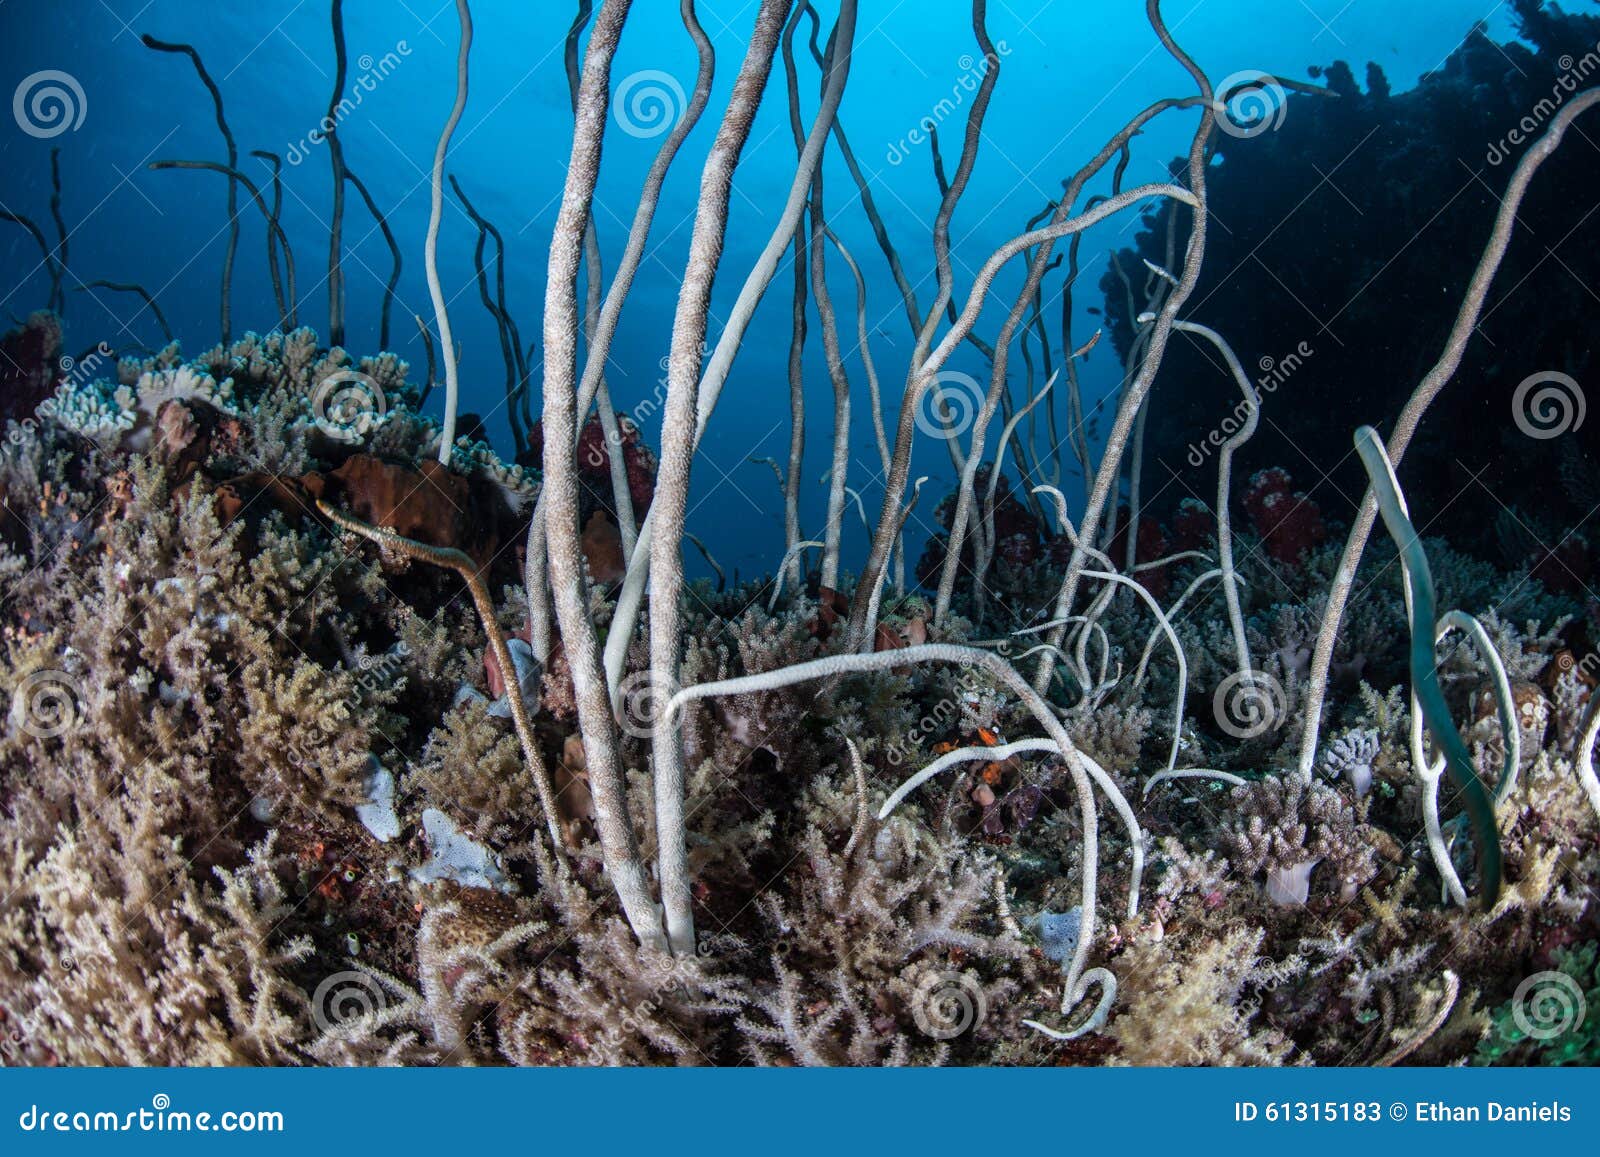 sea whips on pacific coral reef